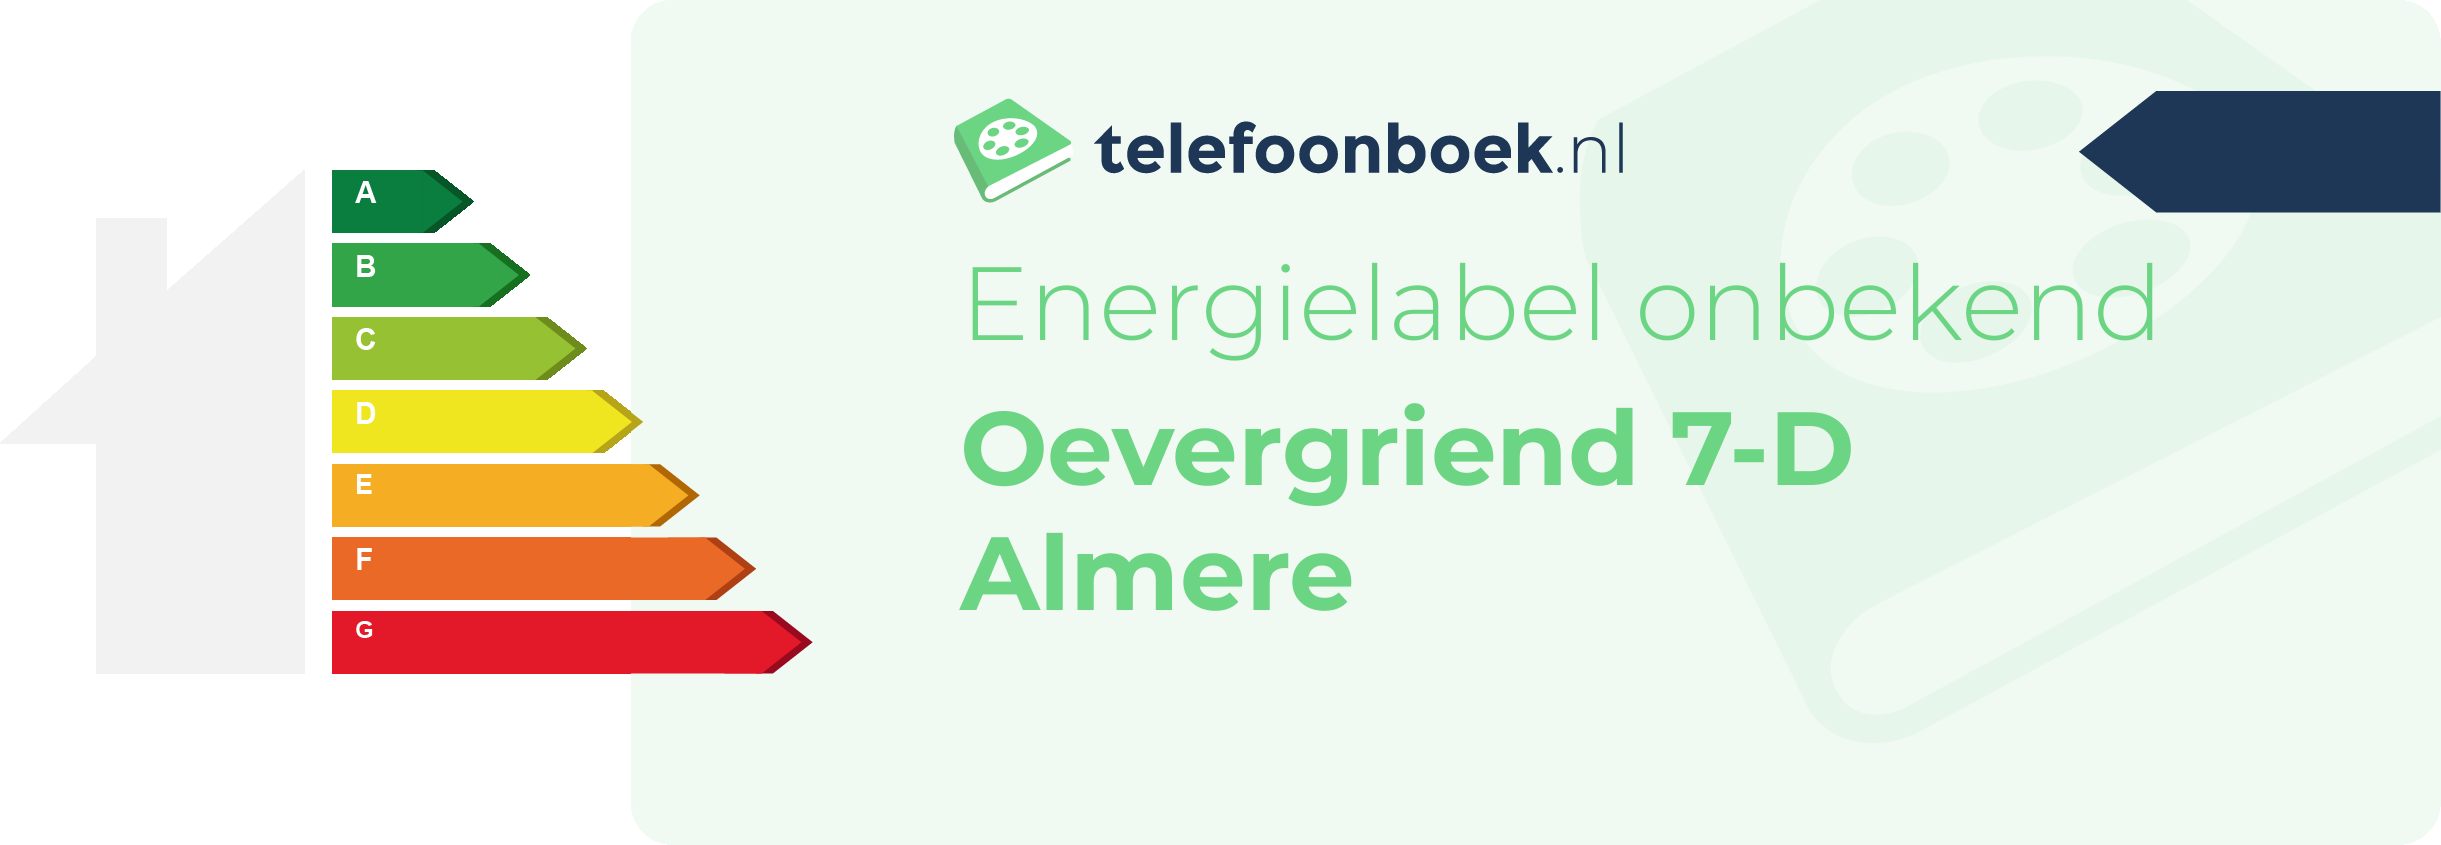 Energielabel Oevergriend 7-D Almere